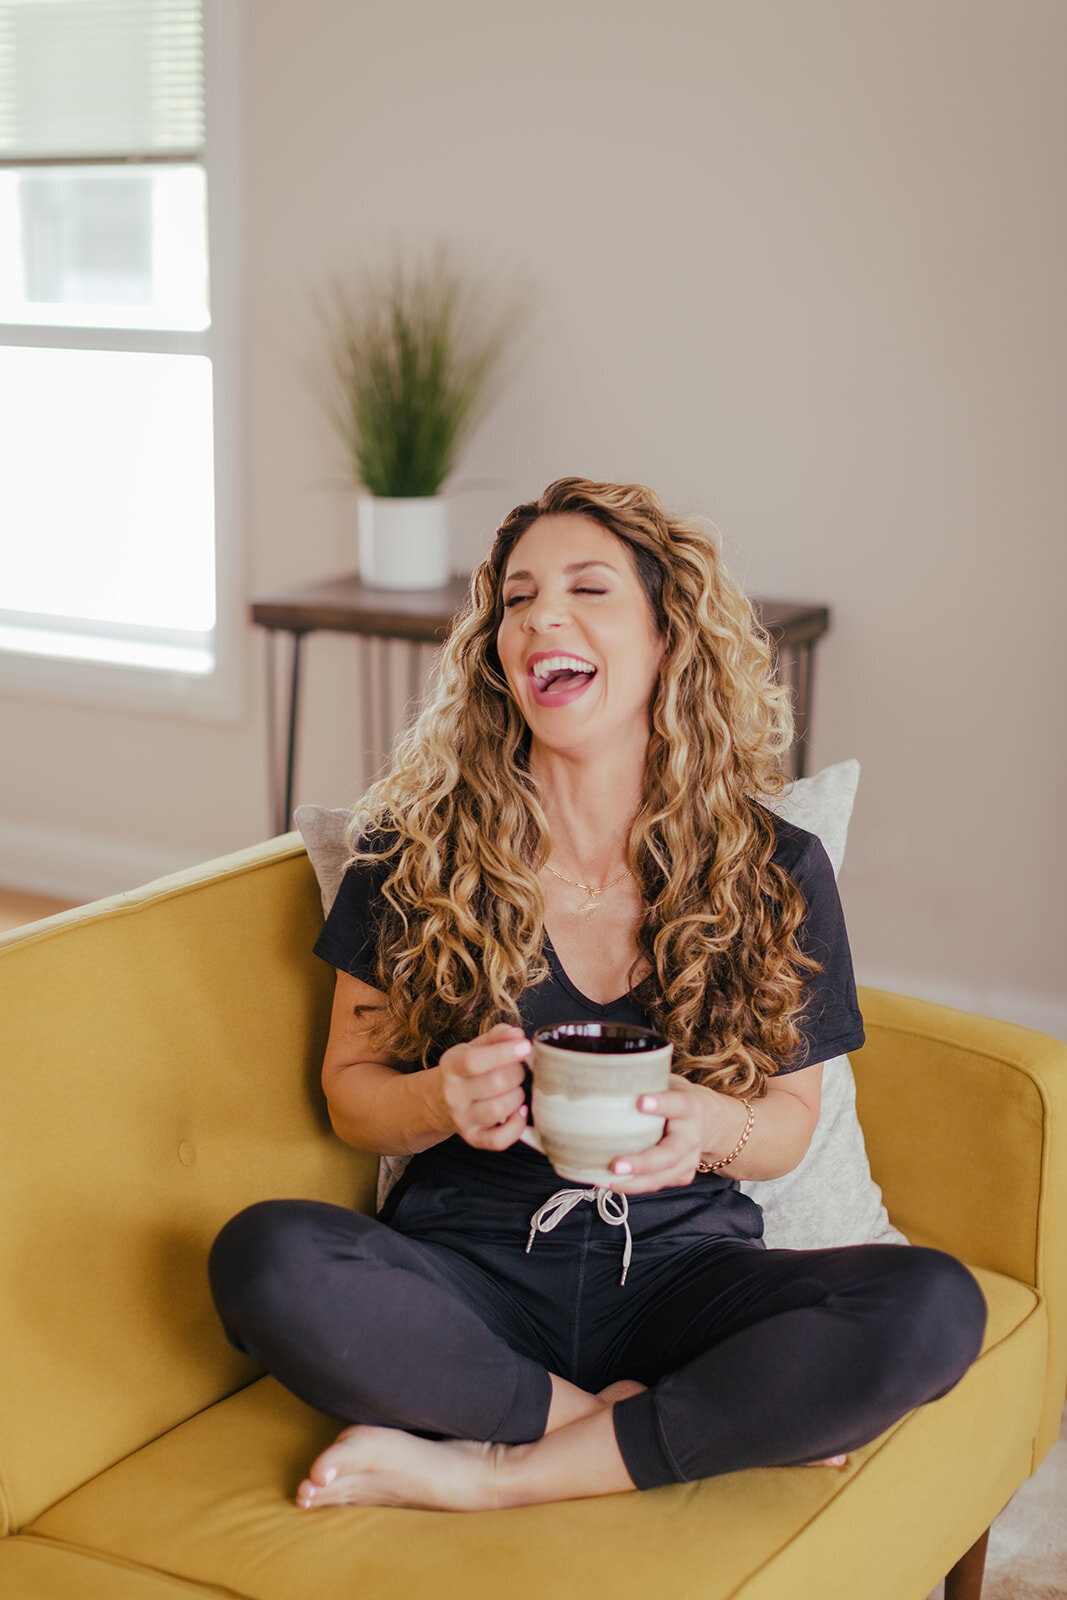 Woman on yellow couch is laughing very hard and holding a cup of coffee. She is wearing navy sweats and a tee.